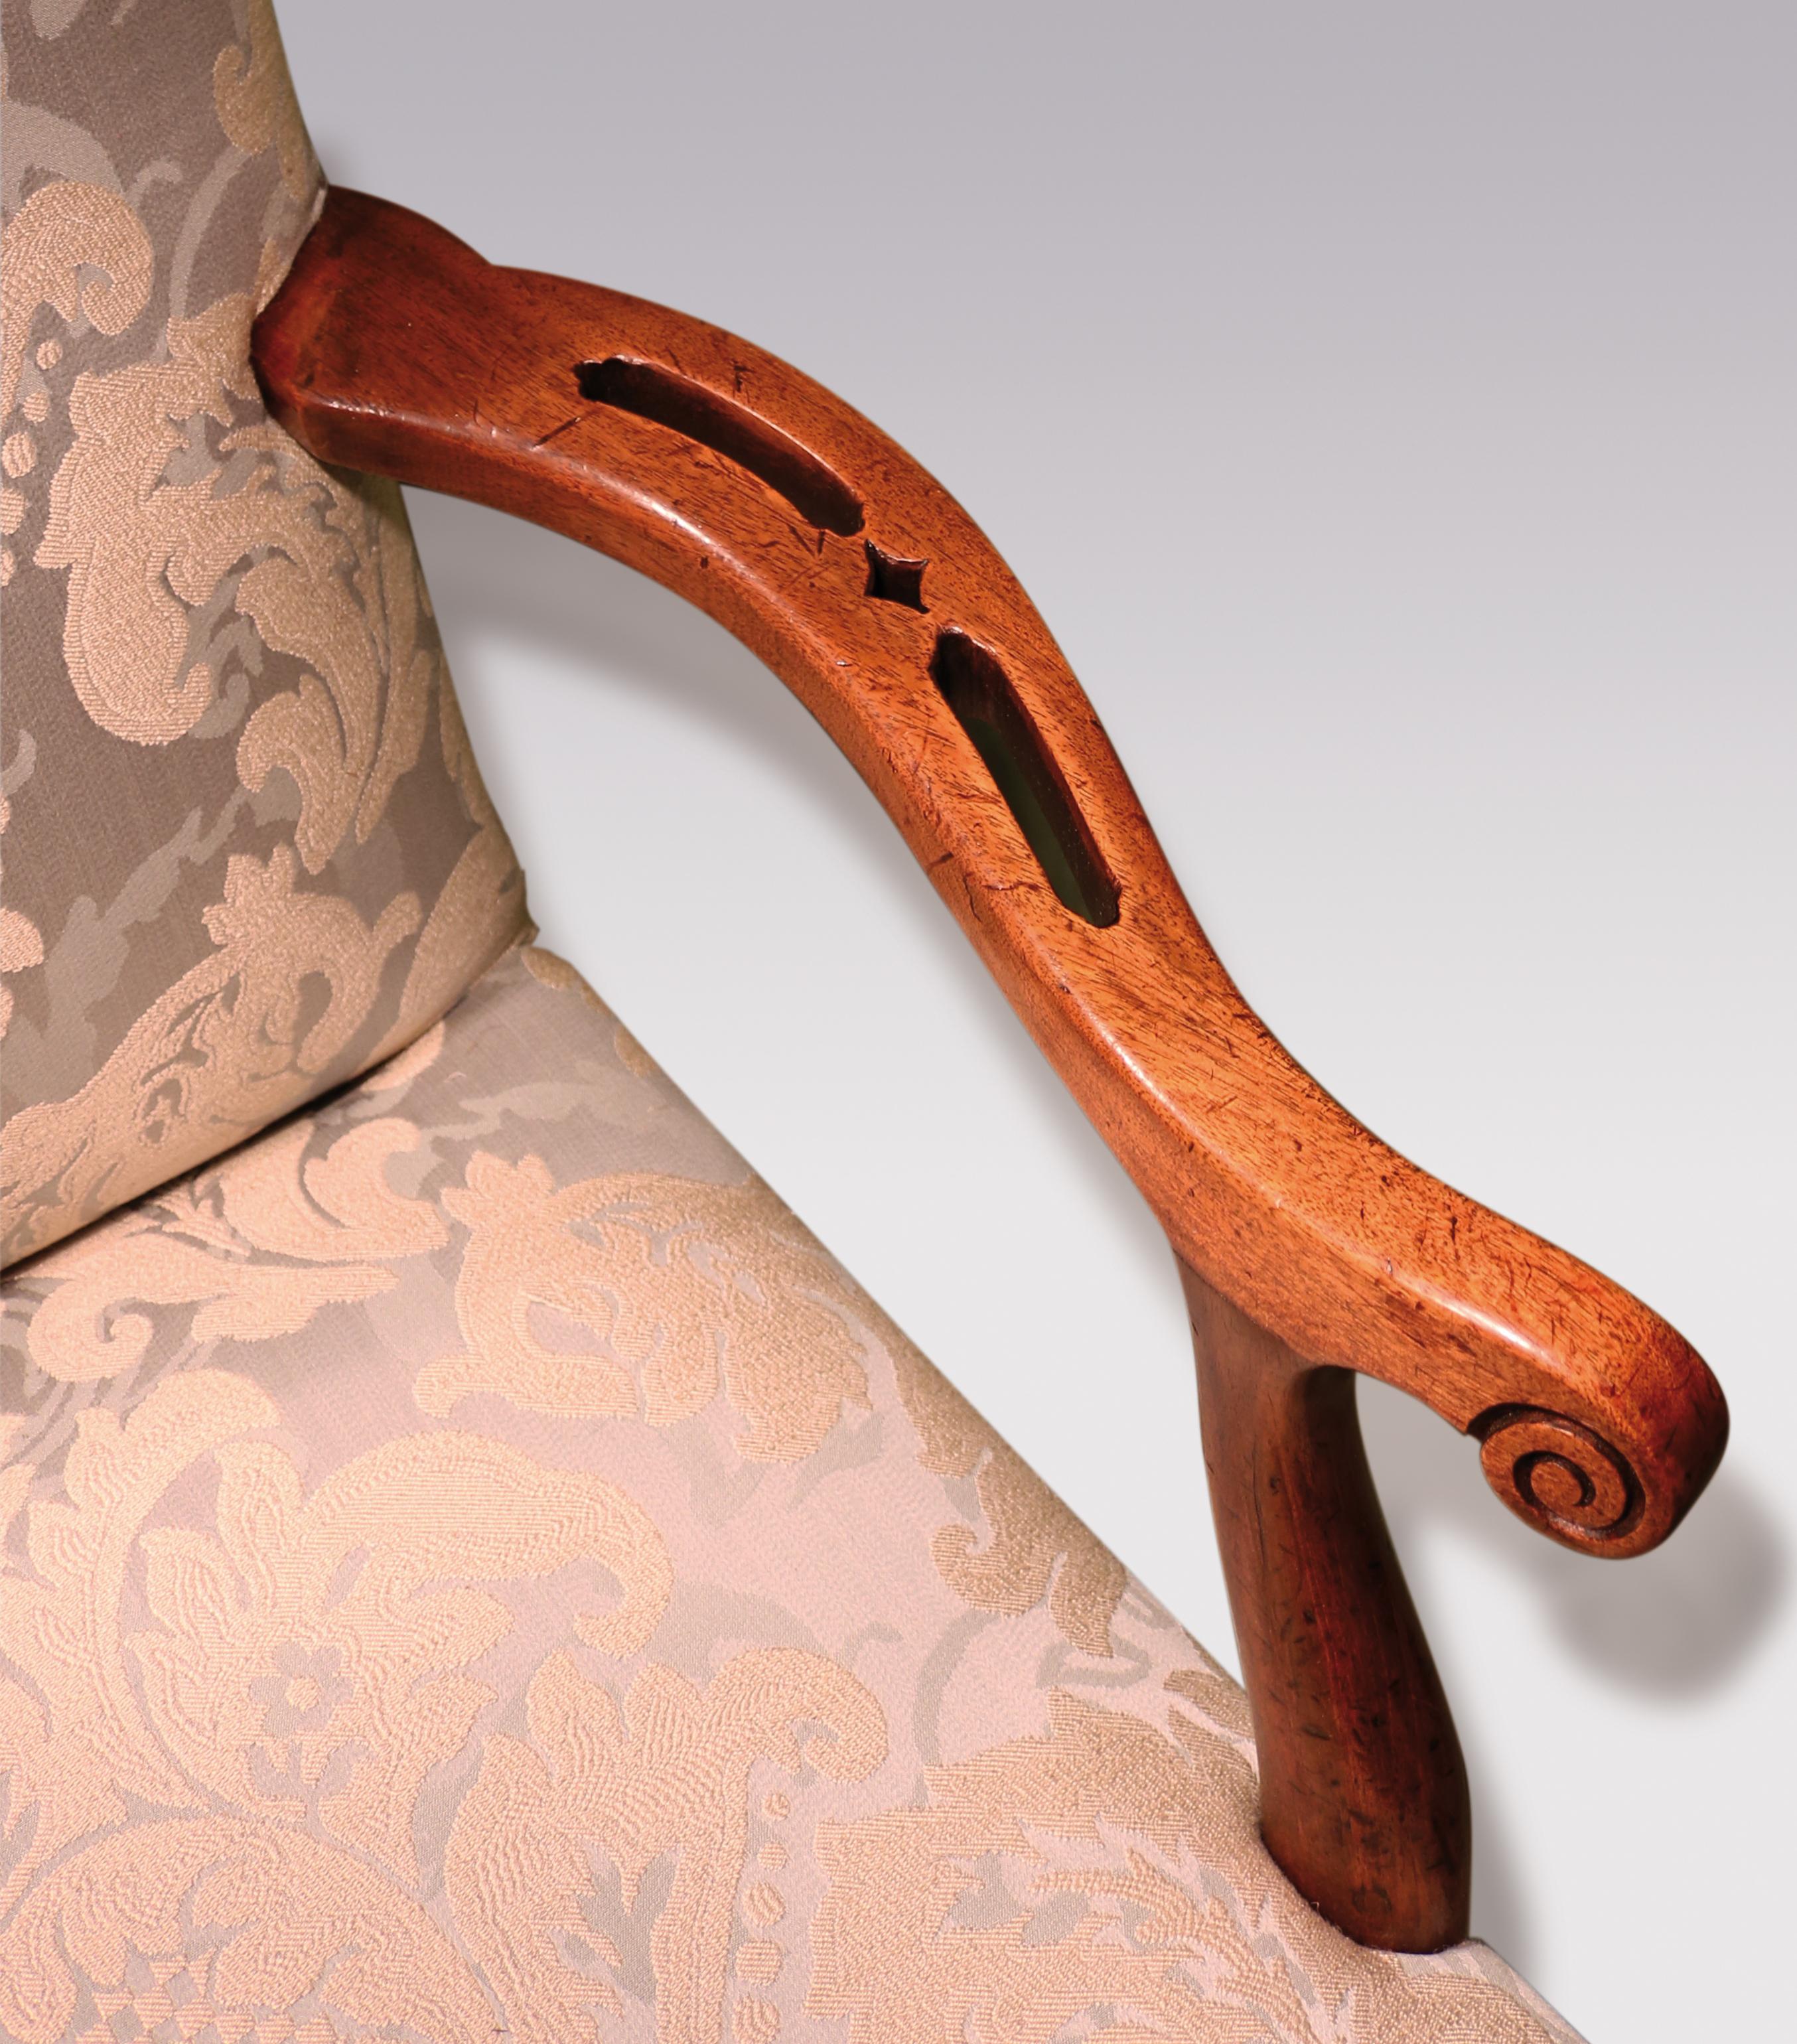 A mid-18th century George III period mahogany Gainsborough chair of attractive small proportions, having serpentine top-rail above shaped scrolled set-back arms with unusual fret piercings, supported on chamfered blind-fret legs joined by pierced